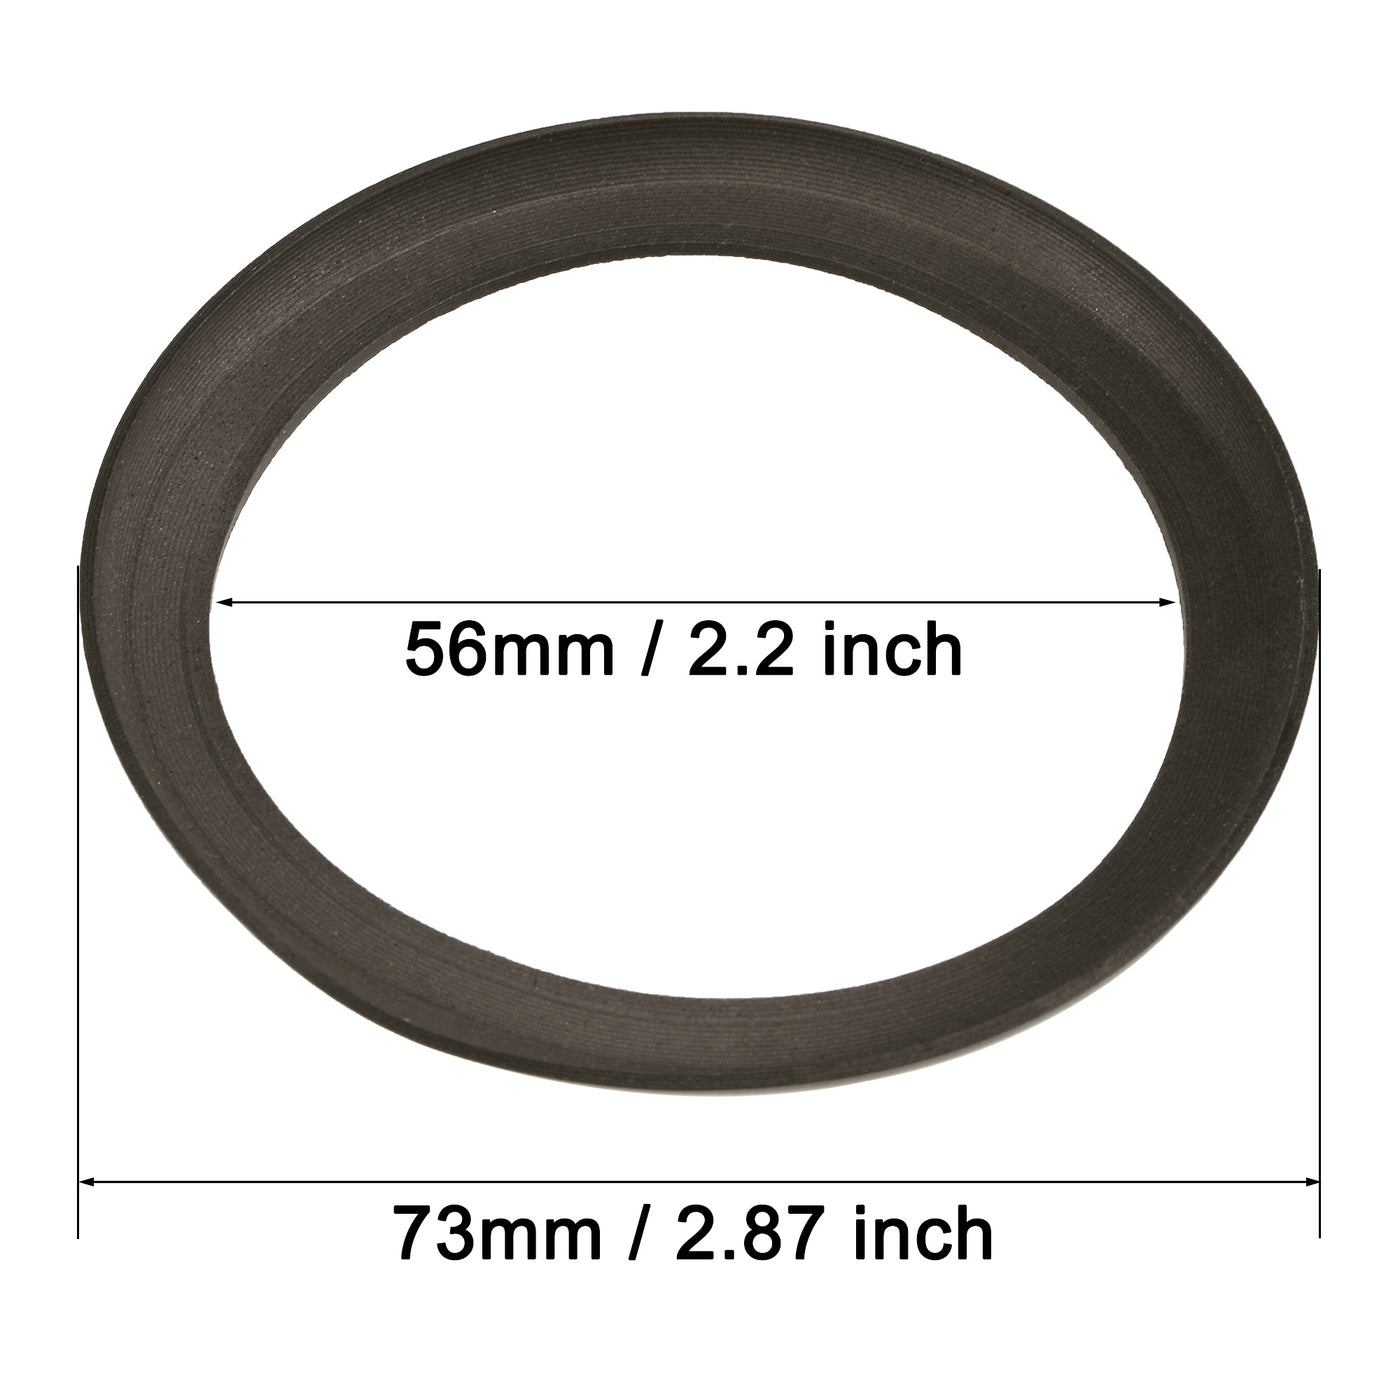 Uxcell Uxcell Air Compressor Compression Piston Ring Replacement Part 67.4mm OD 48mm ID 0.8mm Thickness, Dark Green